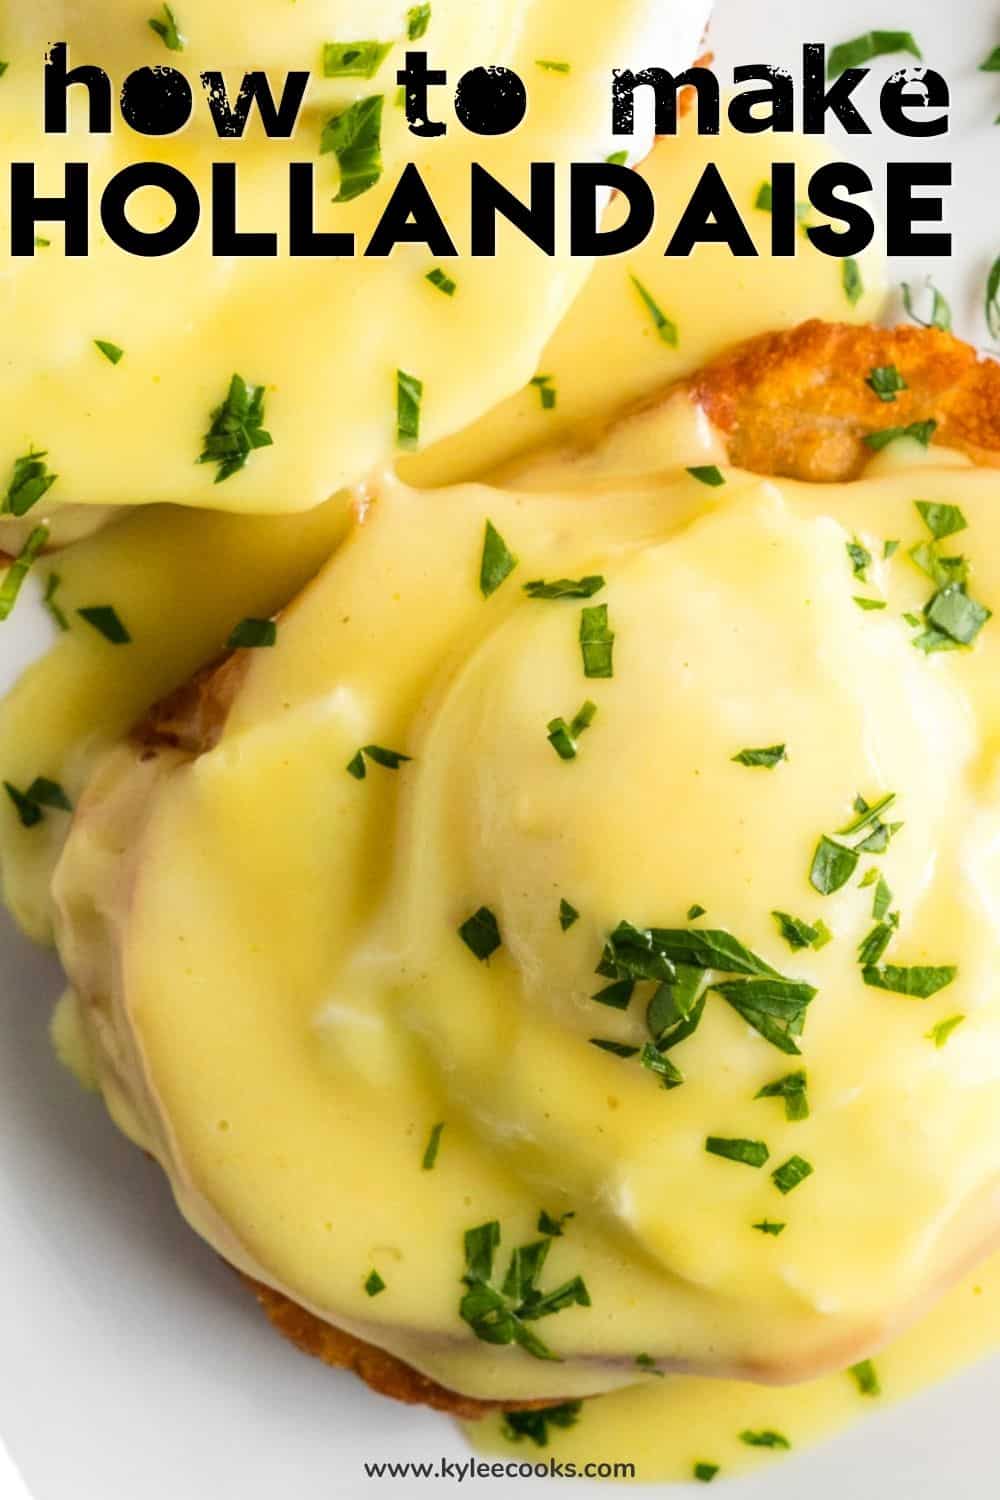 hollandaise sauce with recipe title overlaid in text